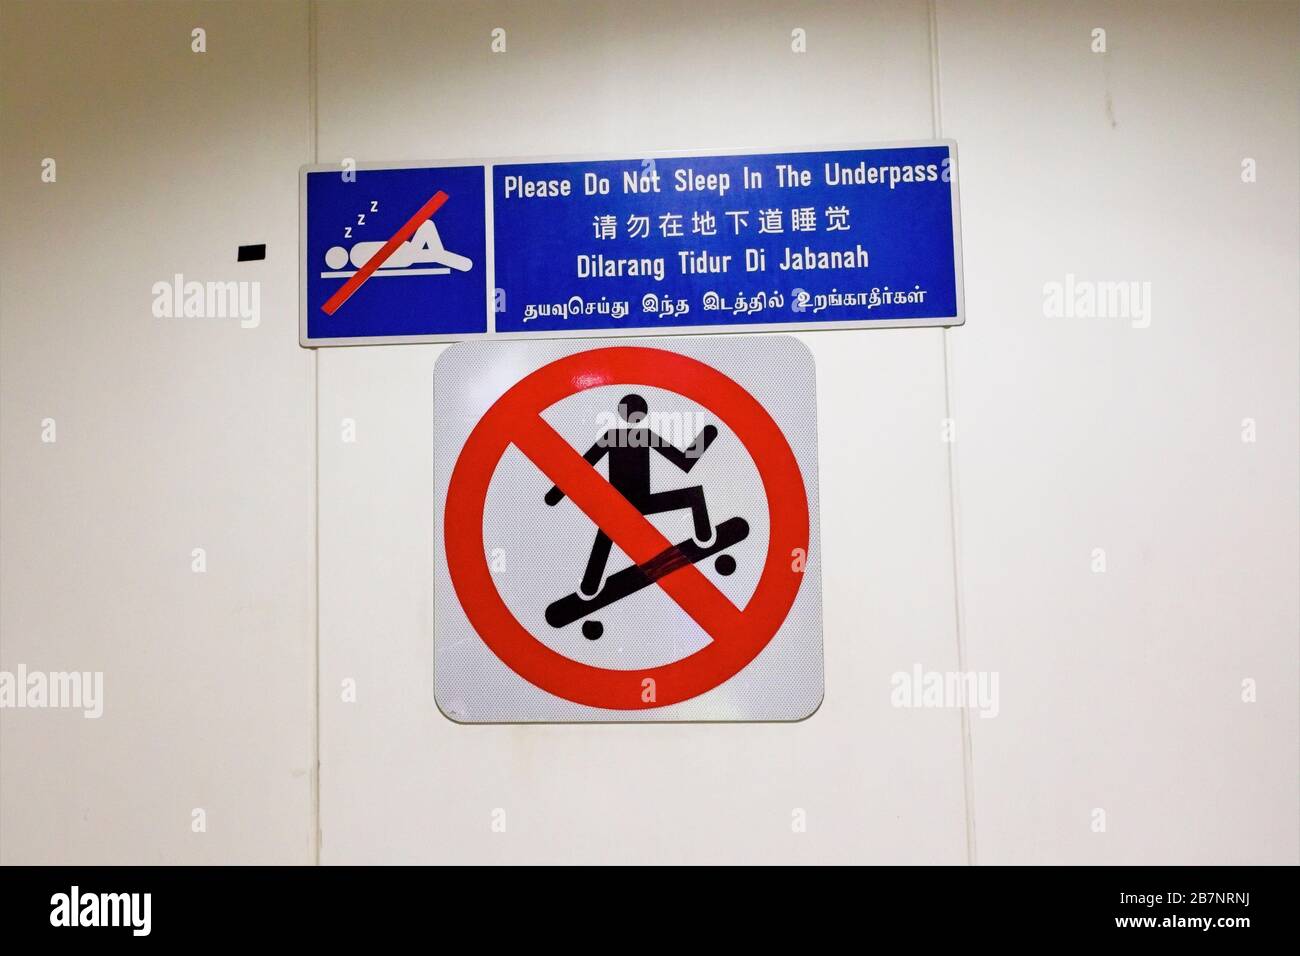 No skate boarding sign and no sleeping in the underpass sign in Singapore Stock Photo